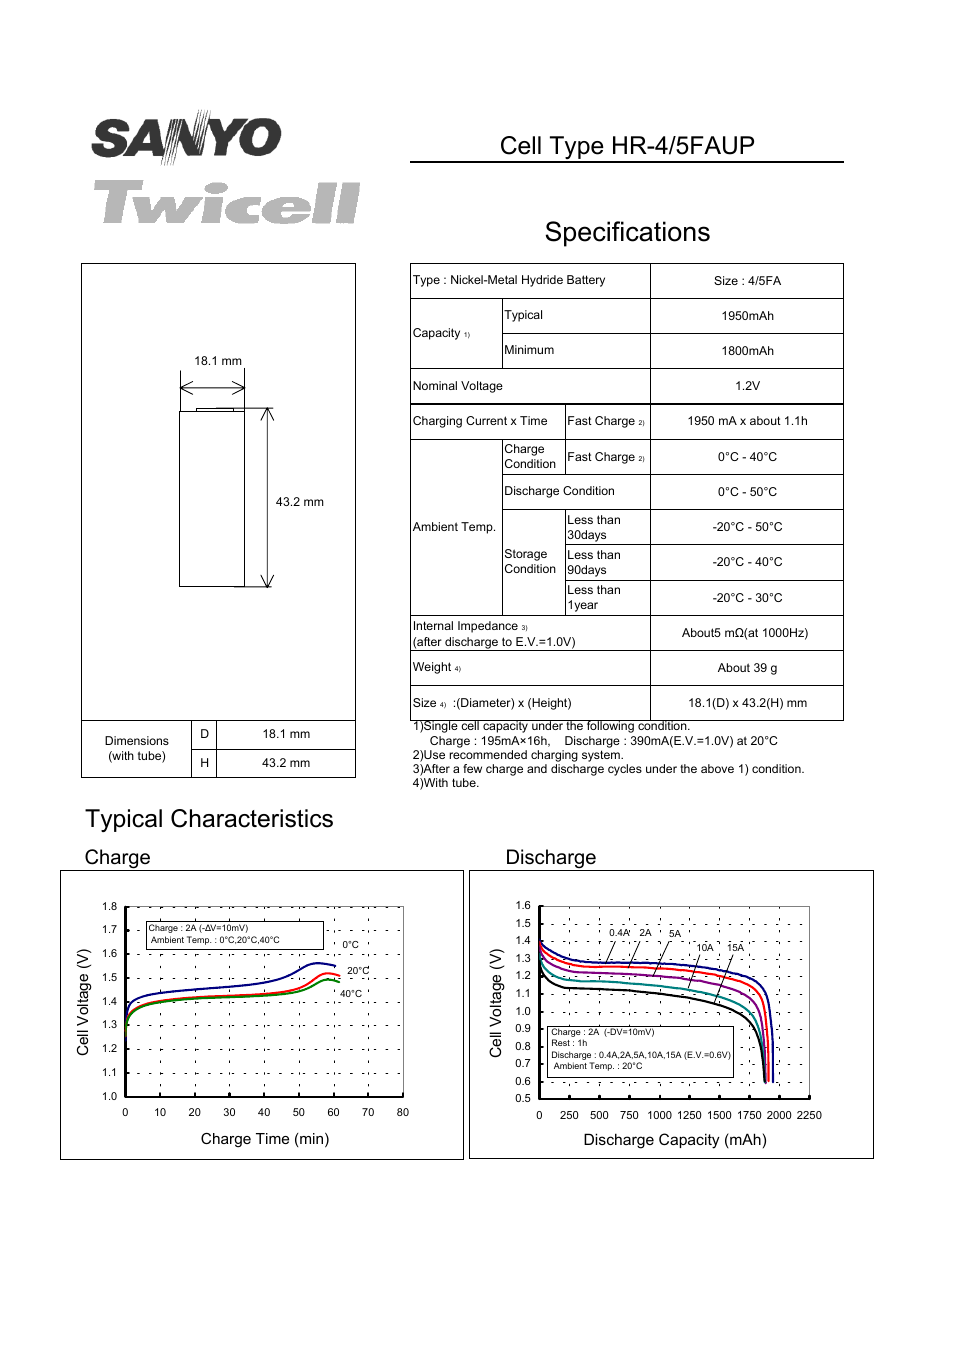 Twicell HR-4/5FAUP